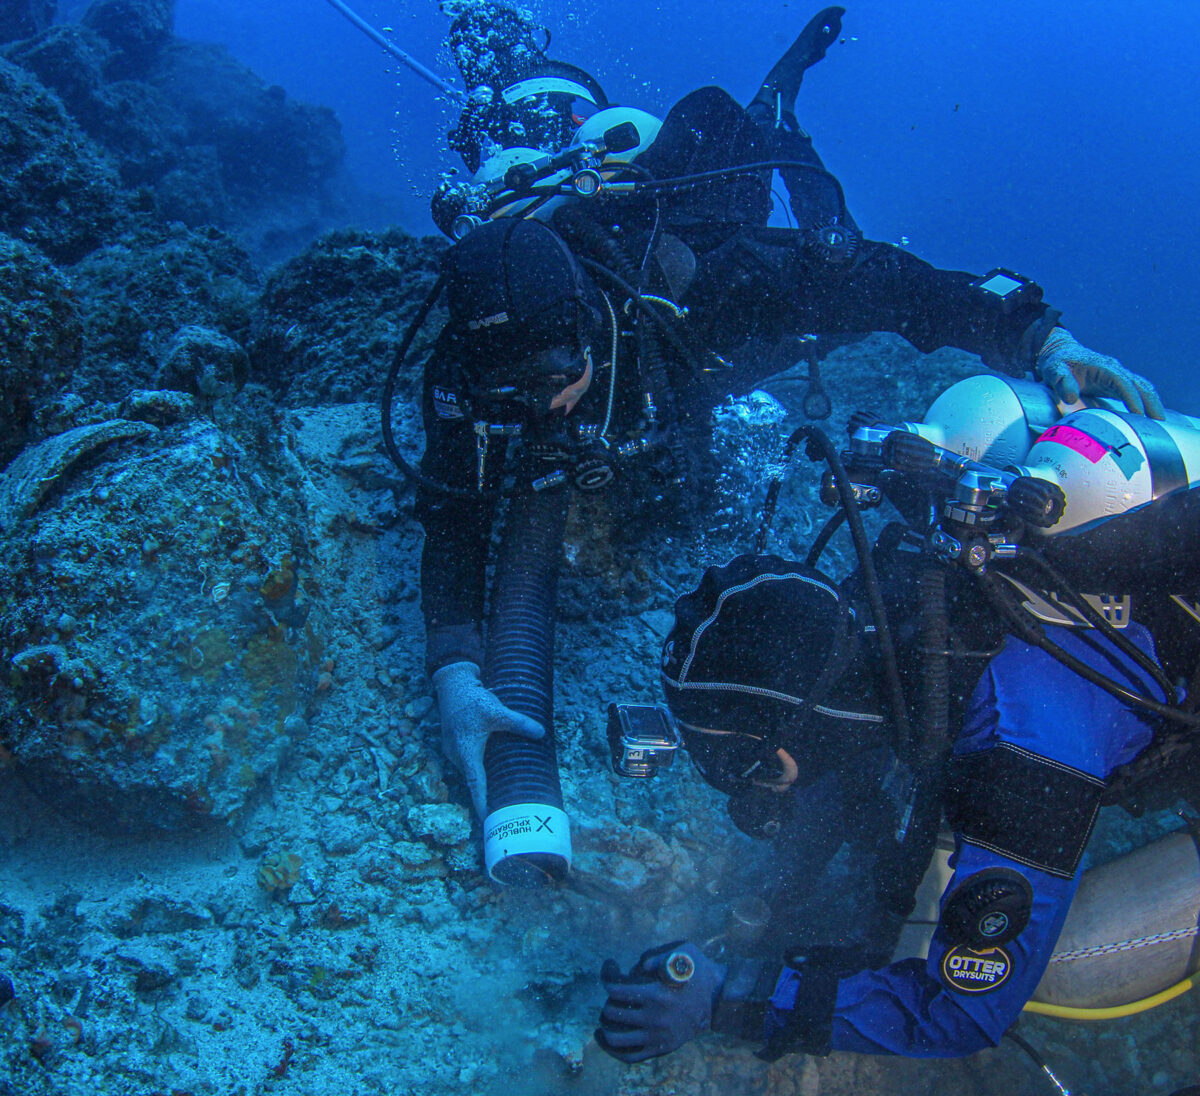 Archaeologist excavating in a trench of the shipwreck aided by a diver from the Coast Guard (image: MOCAS)